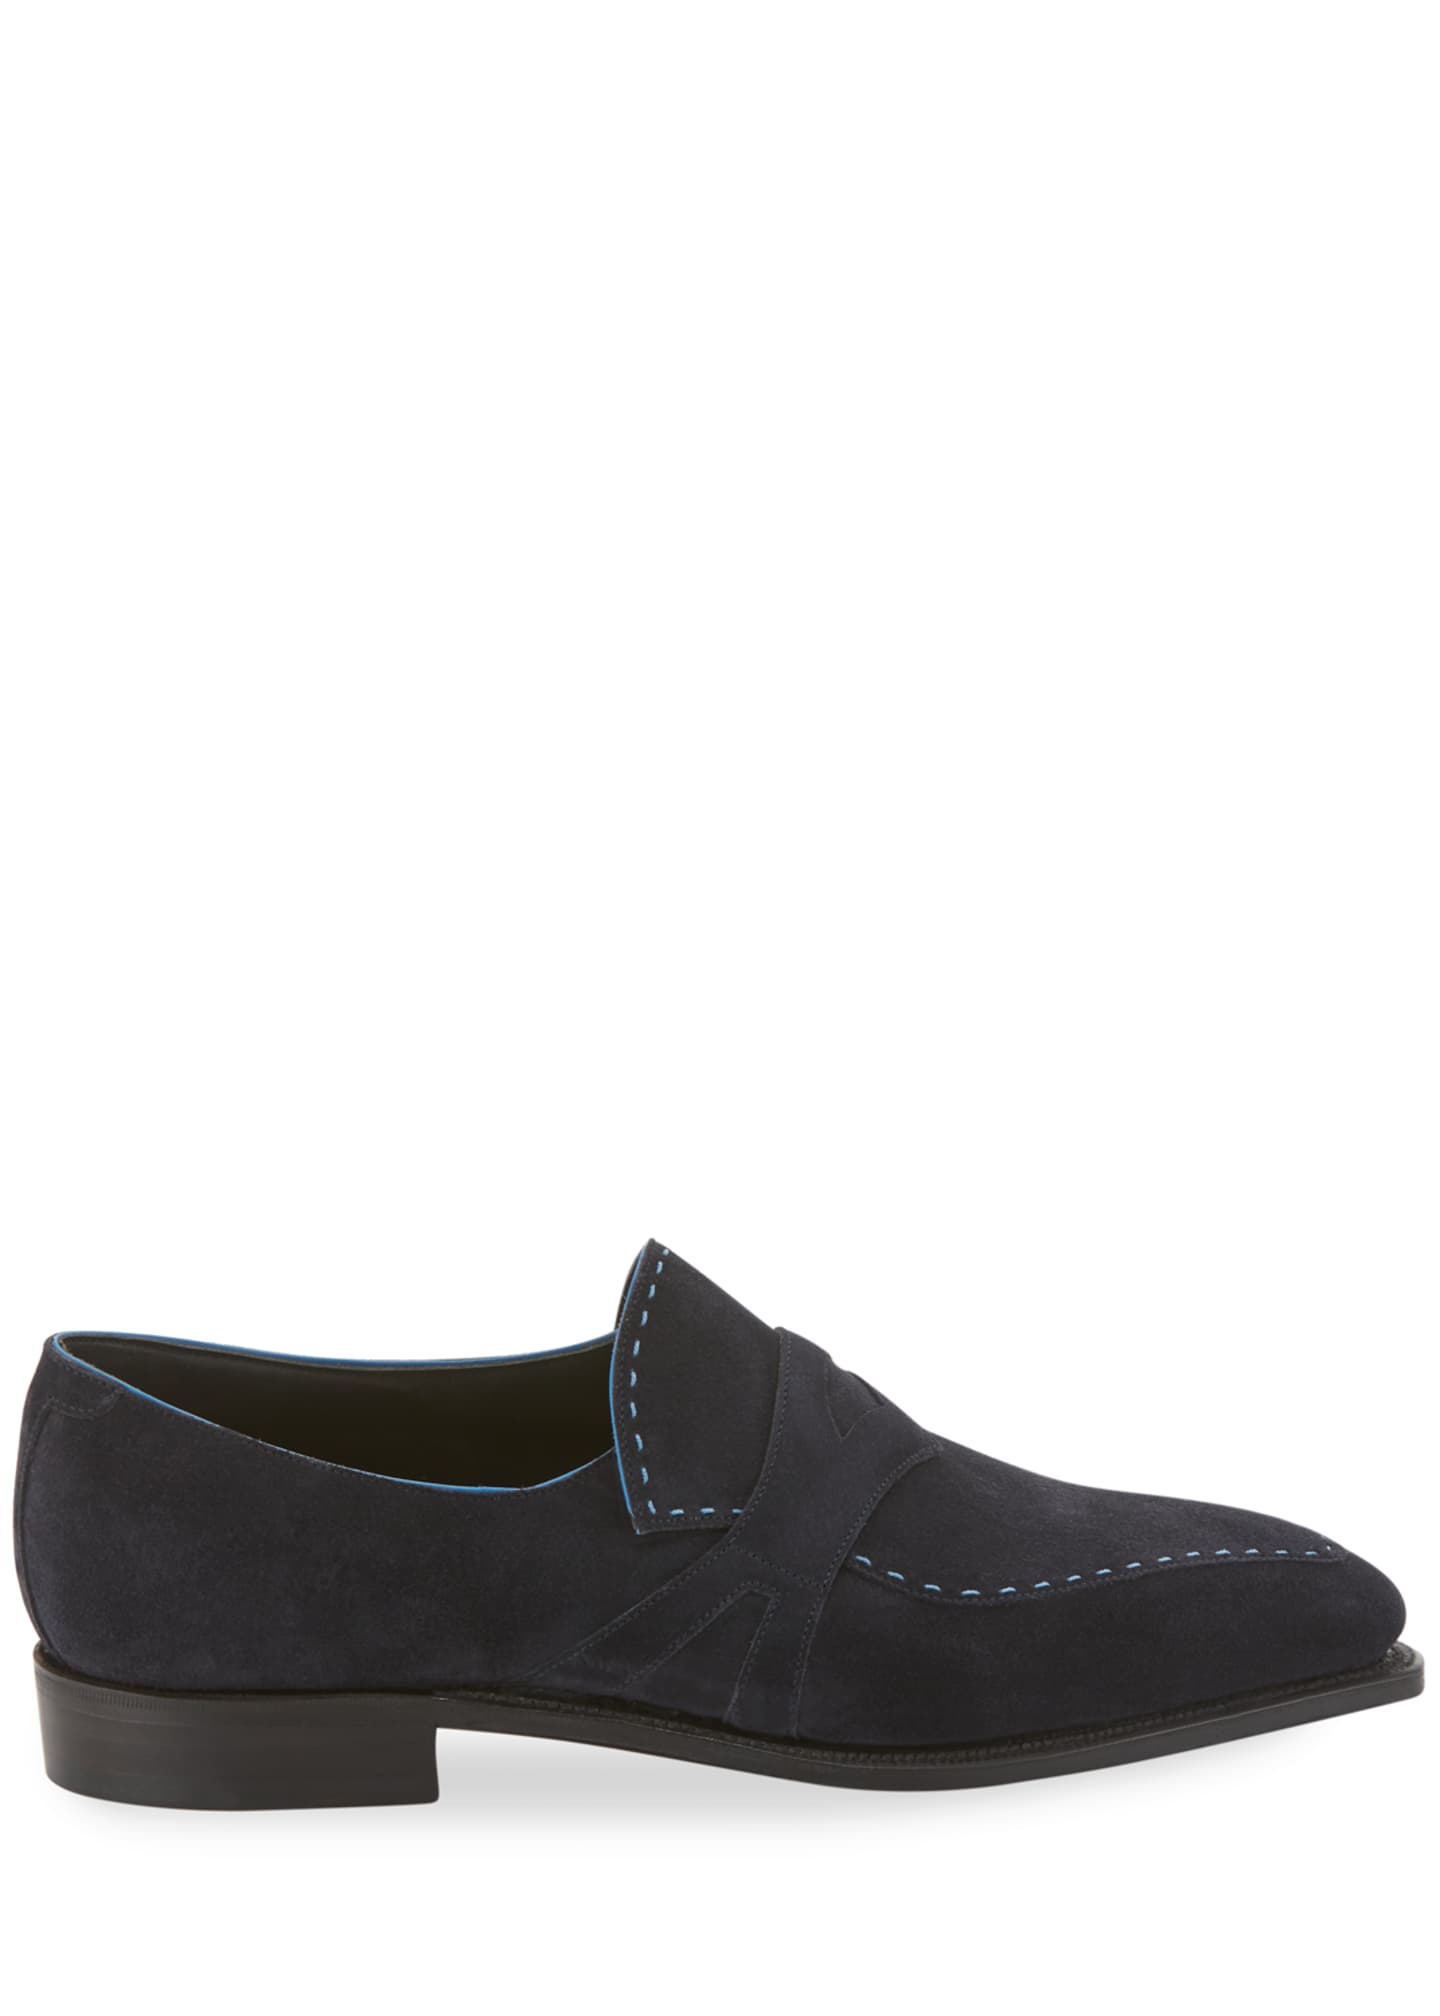 Corthay Men's Rascaille Suede Penny Loafers - Bergdorf Goodman